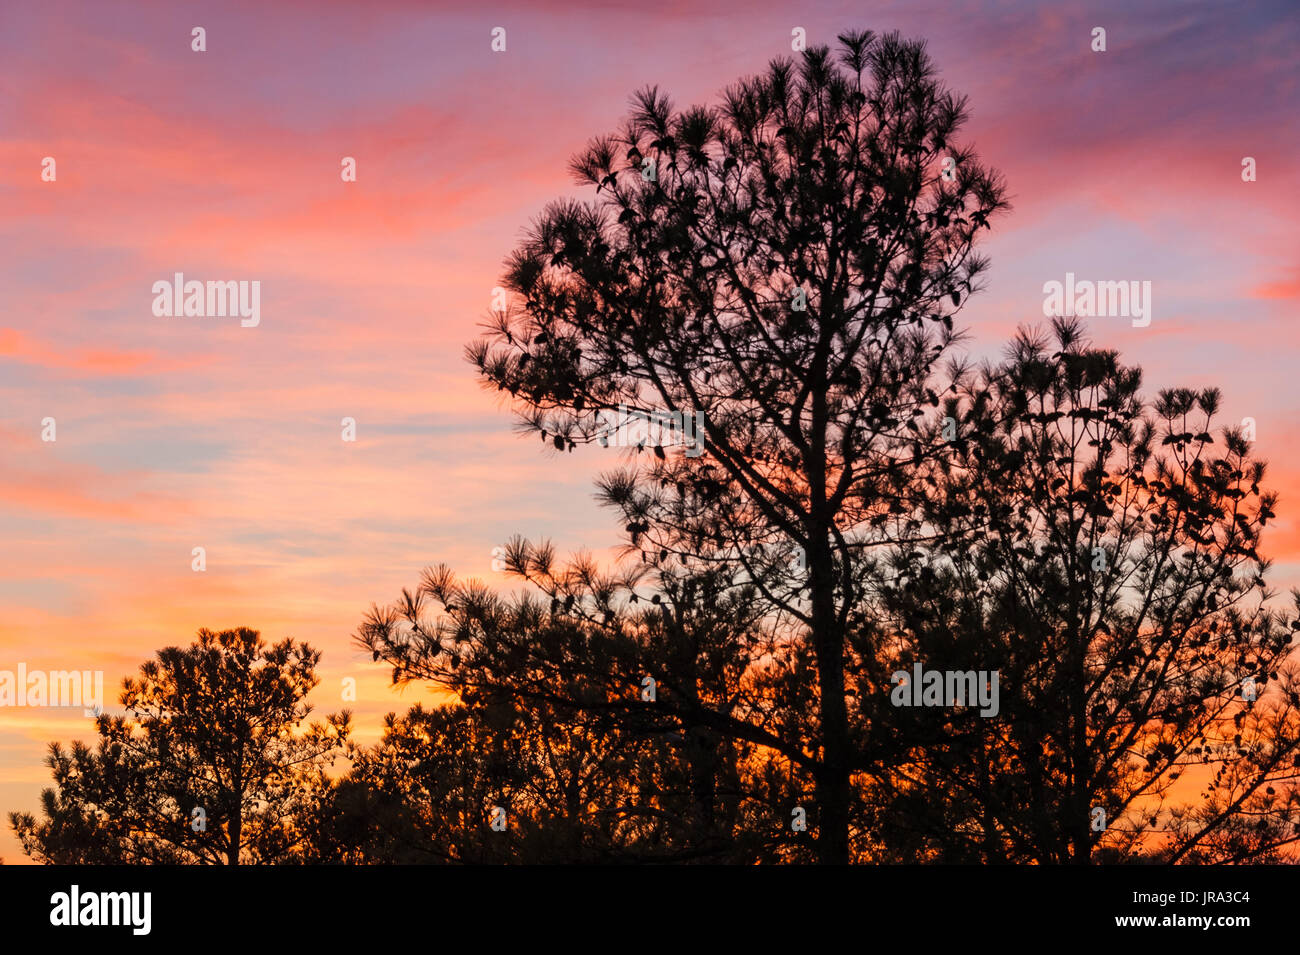 Pine trees loaded with pine cones and silhouetted against a colorful sunset sky at Stone Mountain Park in Atlanta, Georgia. (USA) Stock Photo